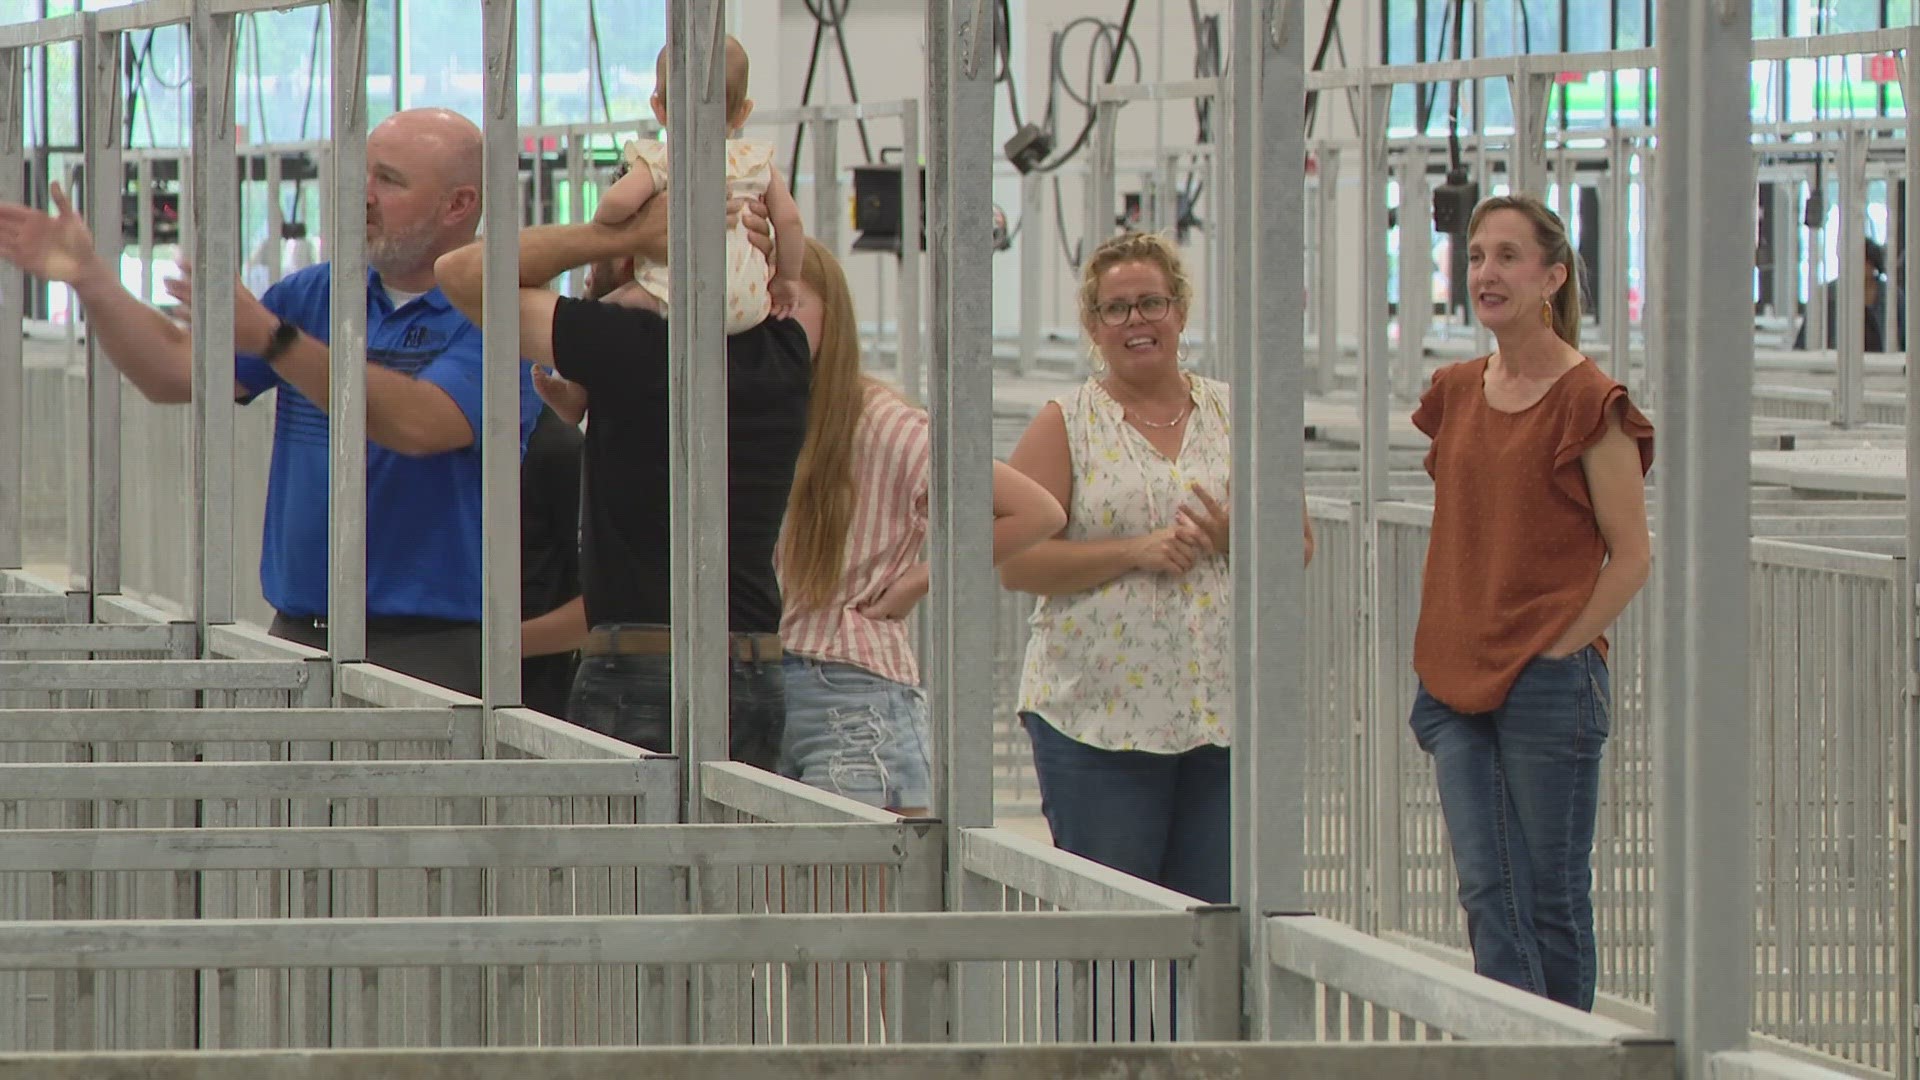 Organizers  have spent the last few weeks offering previews of what to look forward to when the fair opens on Friday.